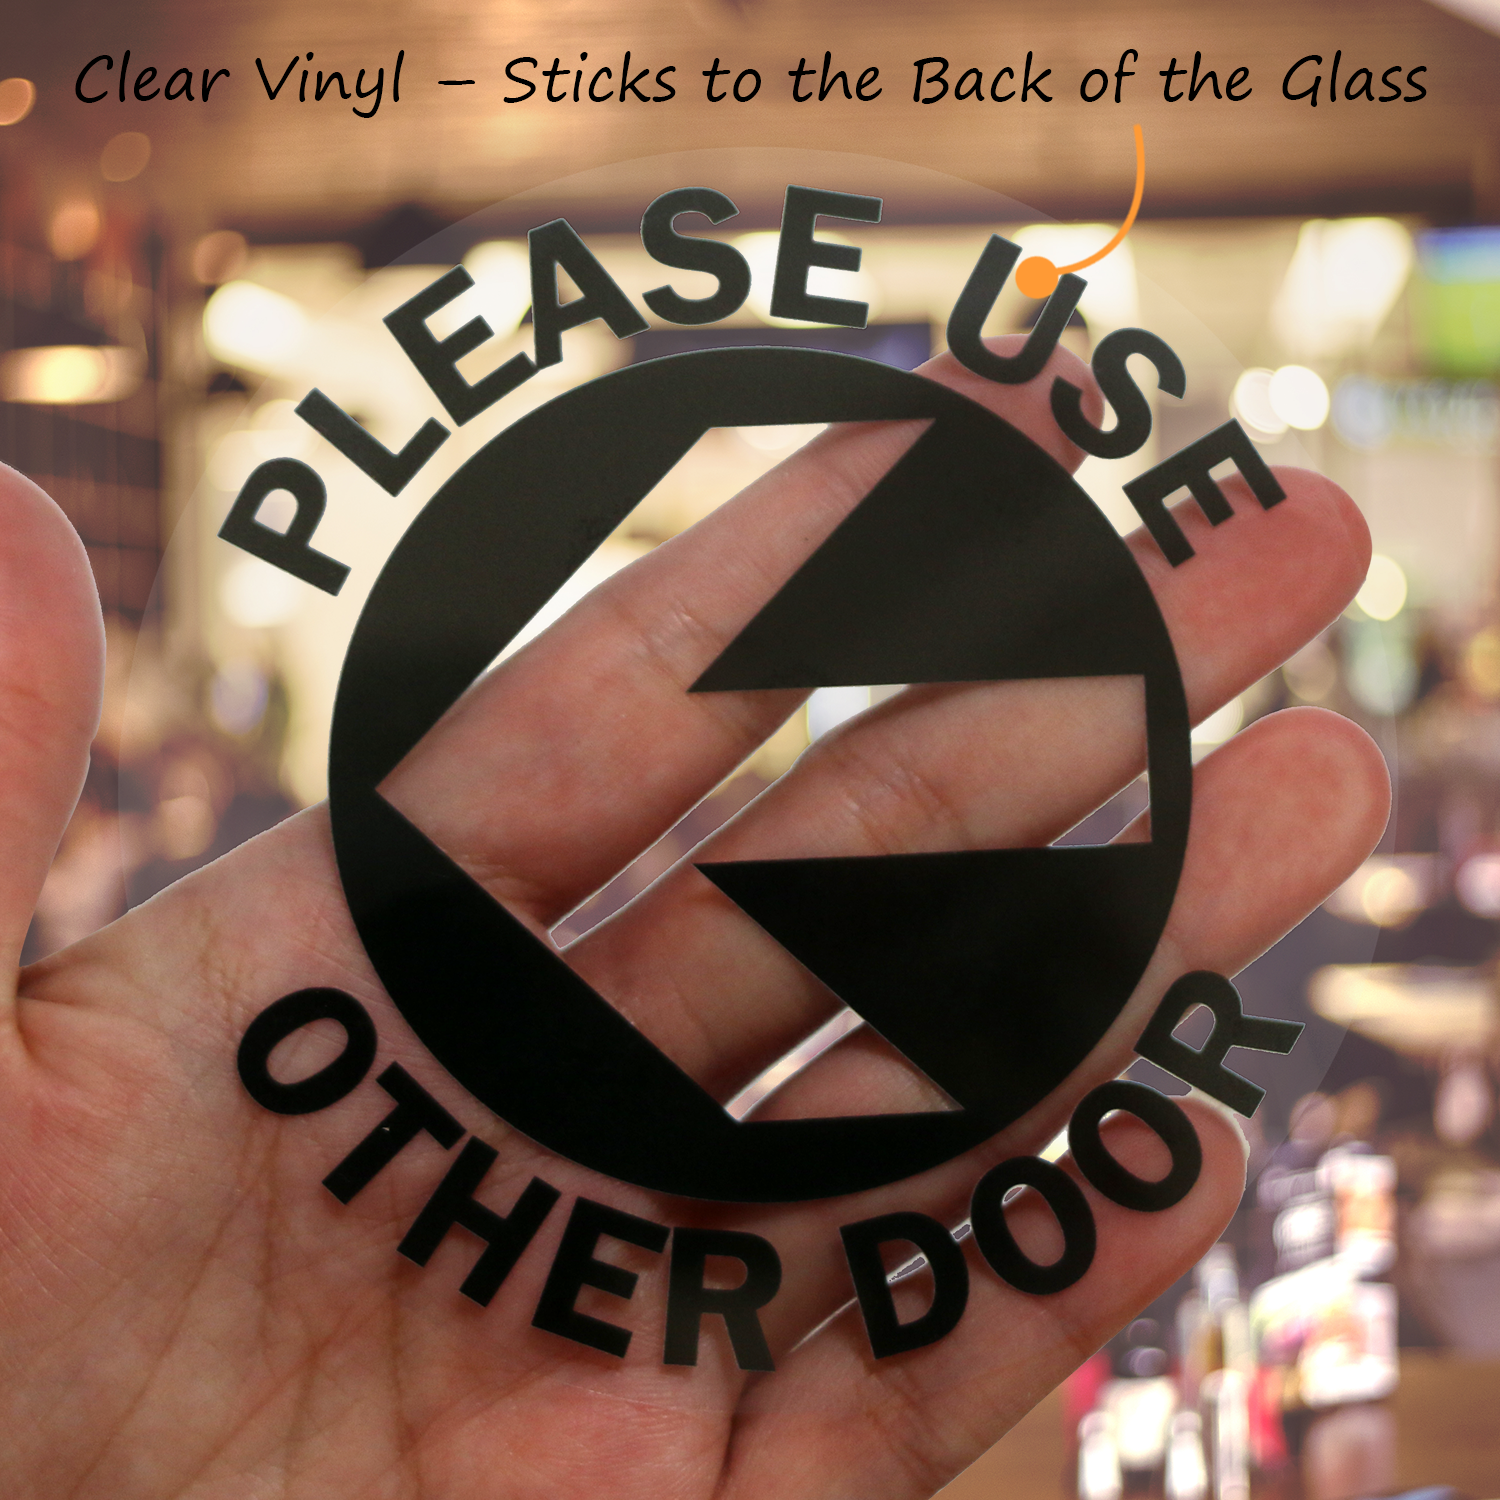 Details about   Please Use Other Door Left or Right Arrow Business Shop Office Sticker Vinyl 